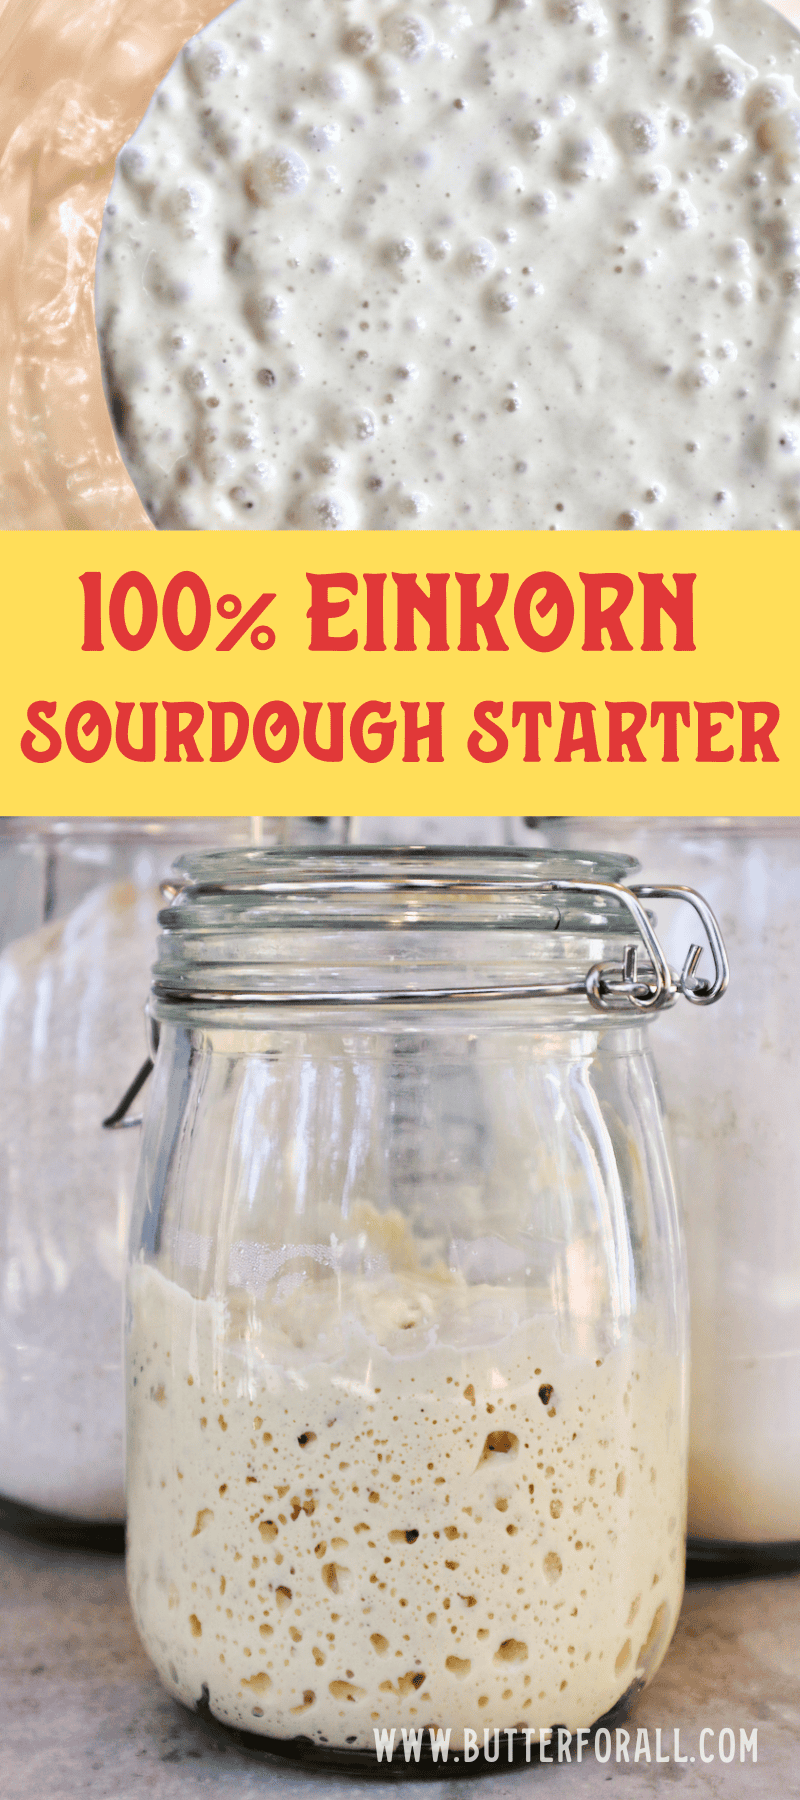 An image collage showing bubbly, active, golden-colored einkorn sourdough starter.